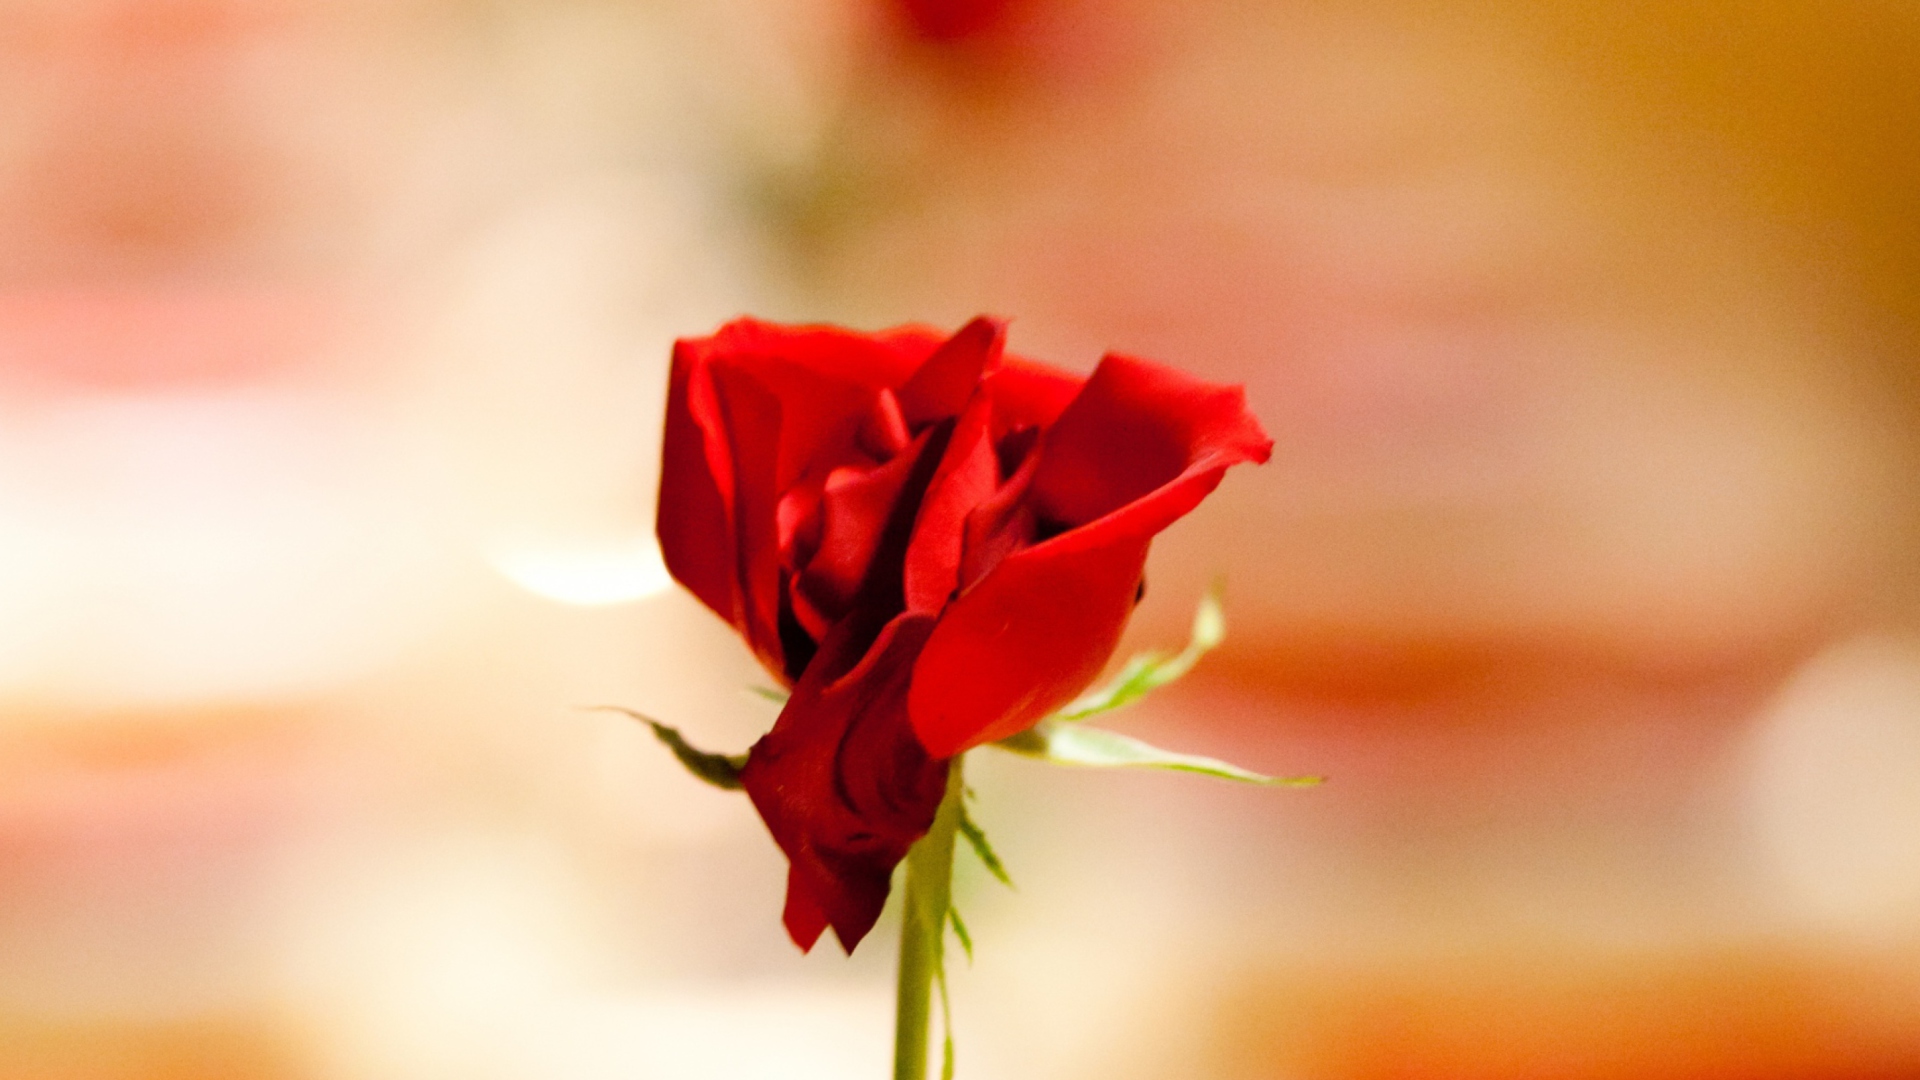 One Red Rose For You screenshot #1 1920x1080